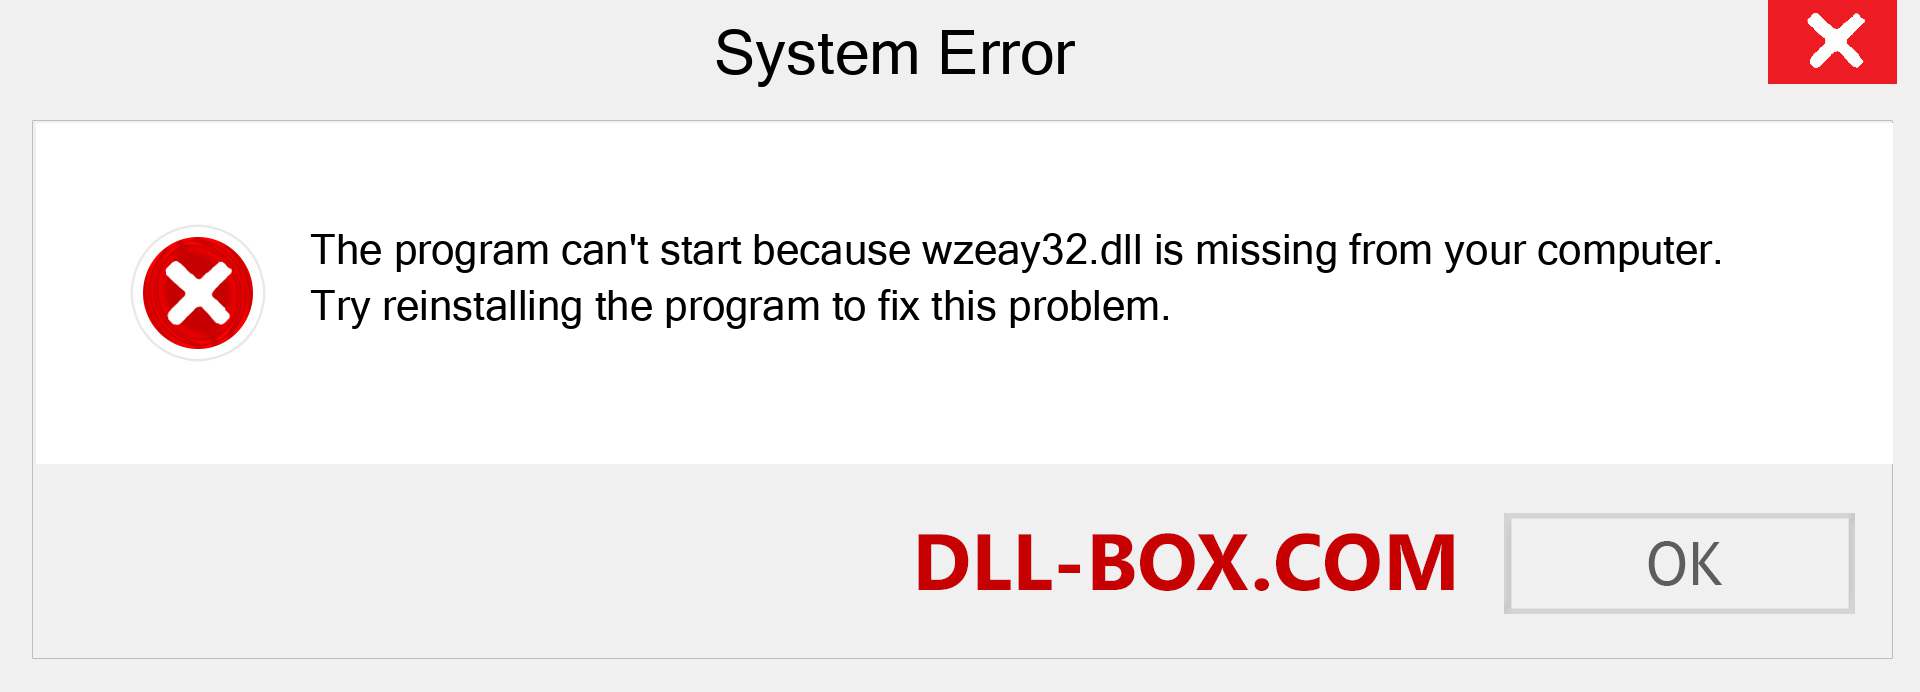  wzeay32.dll file is missing?. Download for Windows 7, 8, 10 - Fix  wzeay32 dll Missing Error on Windows, photos, images